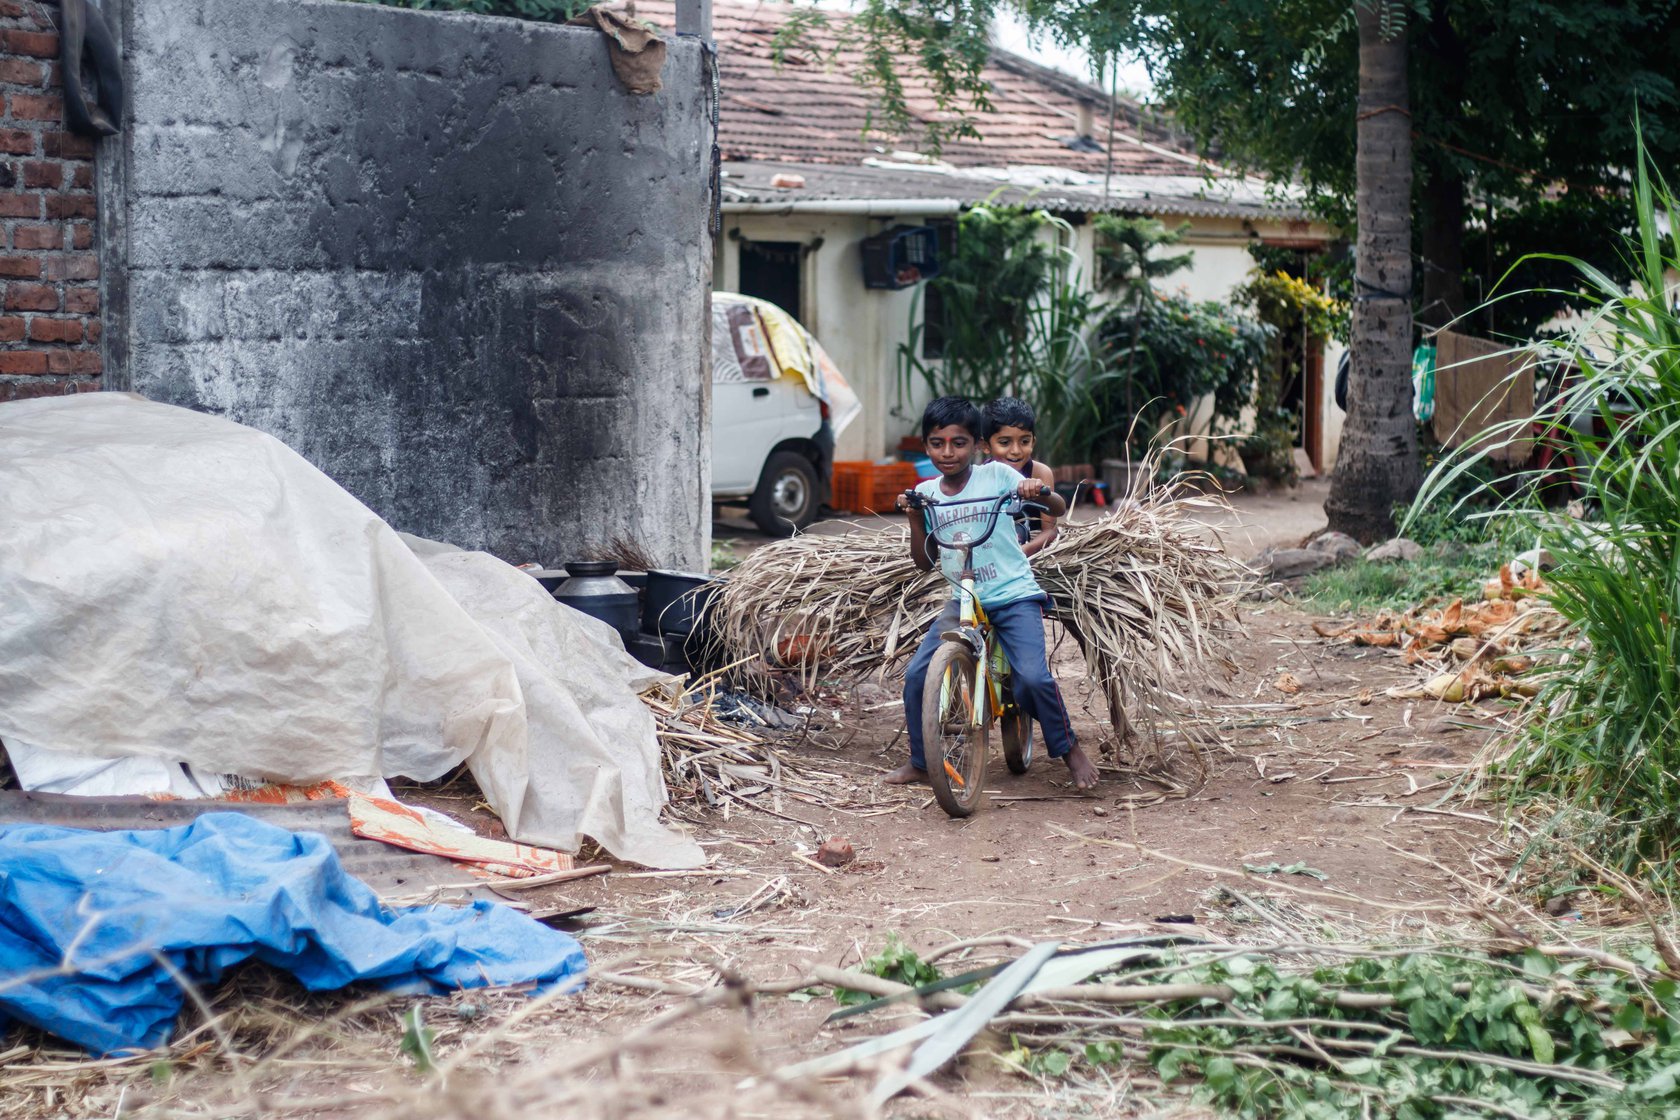 Narayan’s grandson, Varad Gaikwad, 9, bringing sugarcane tops from the field on the back of his cycle to help with the thatching process.